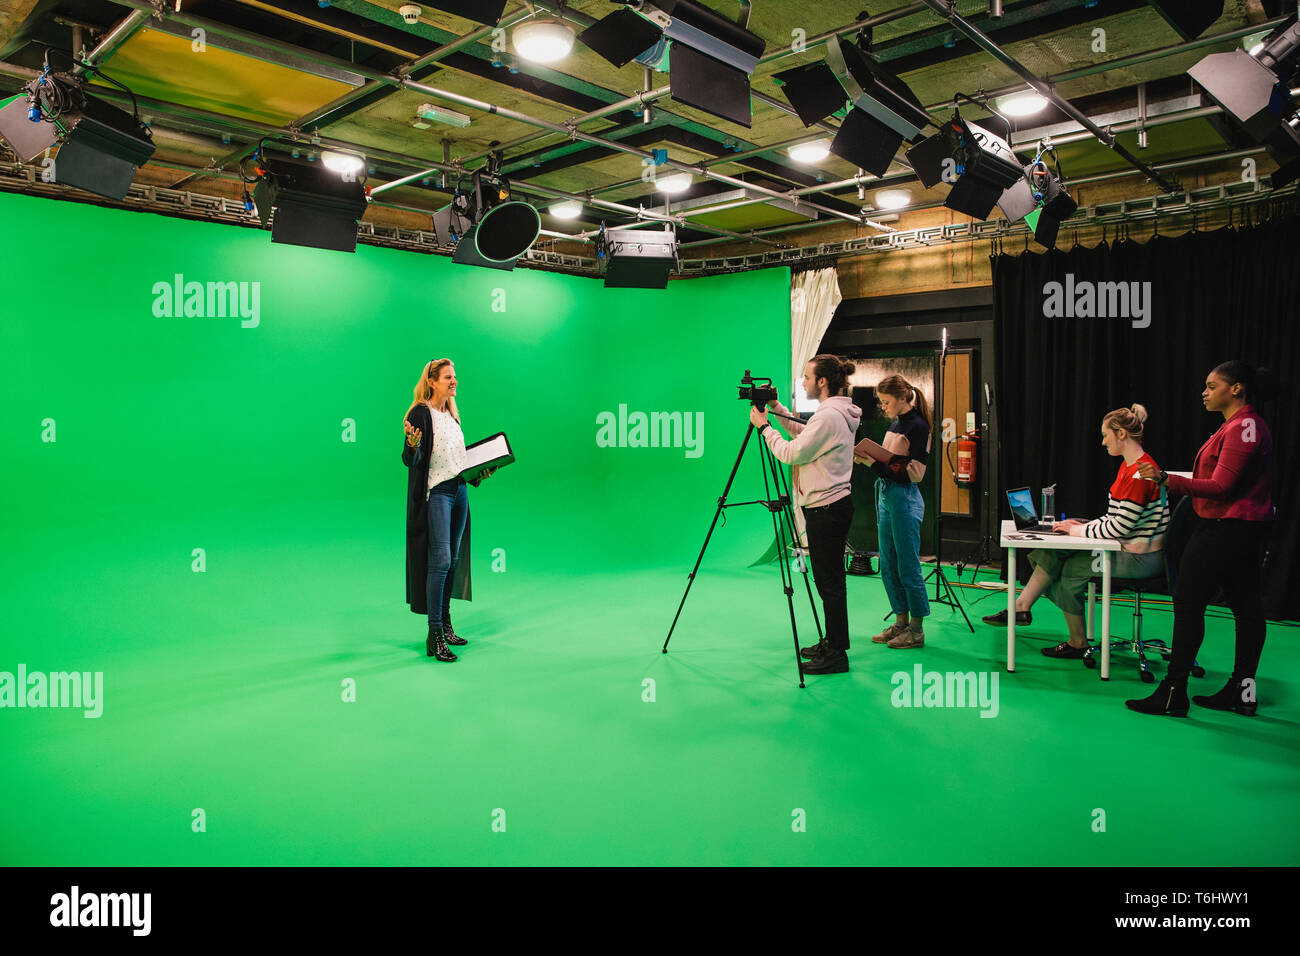 A wide-angle shot of a multi-ethnic group of people working in a film studio, a mature caucasian woman can be seen presenting in front of a green scre Stock Photo